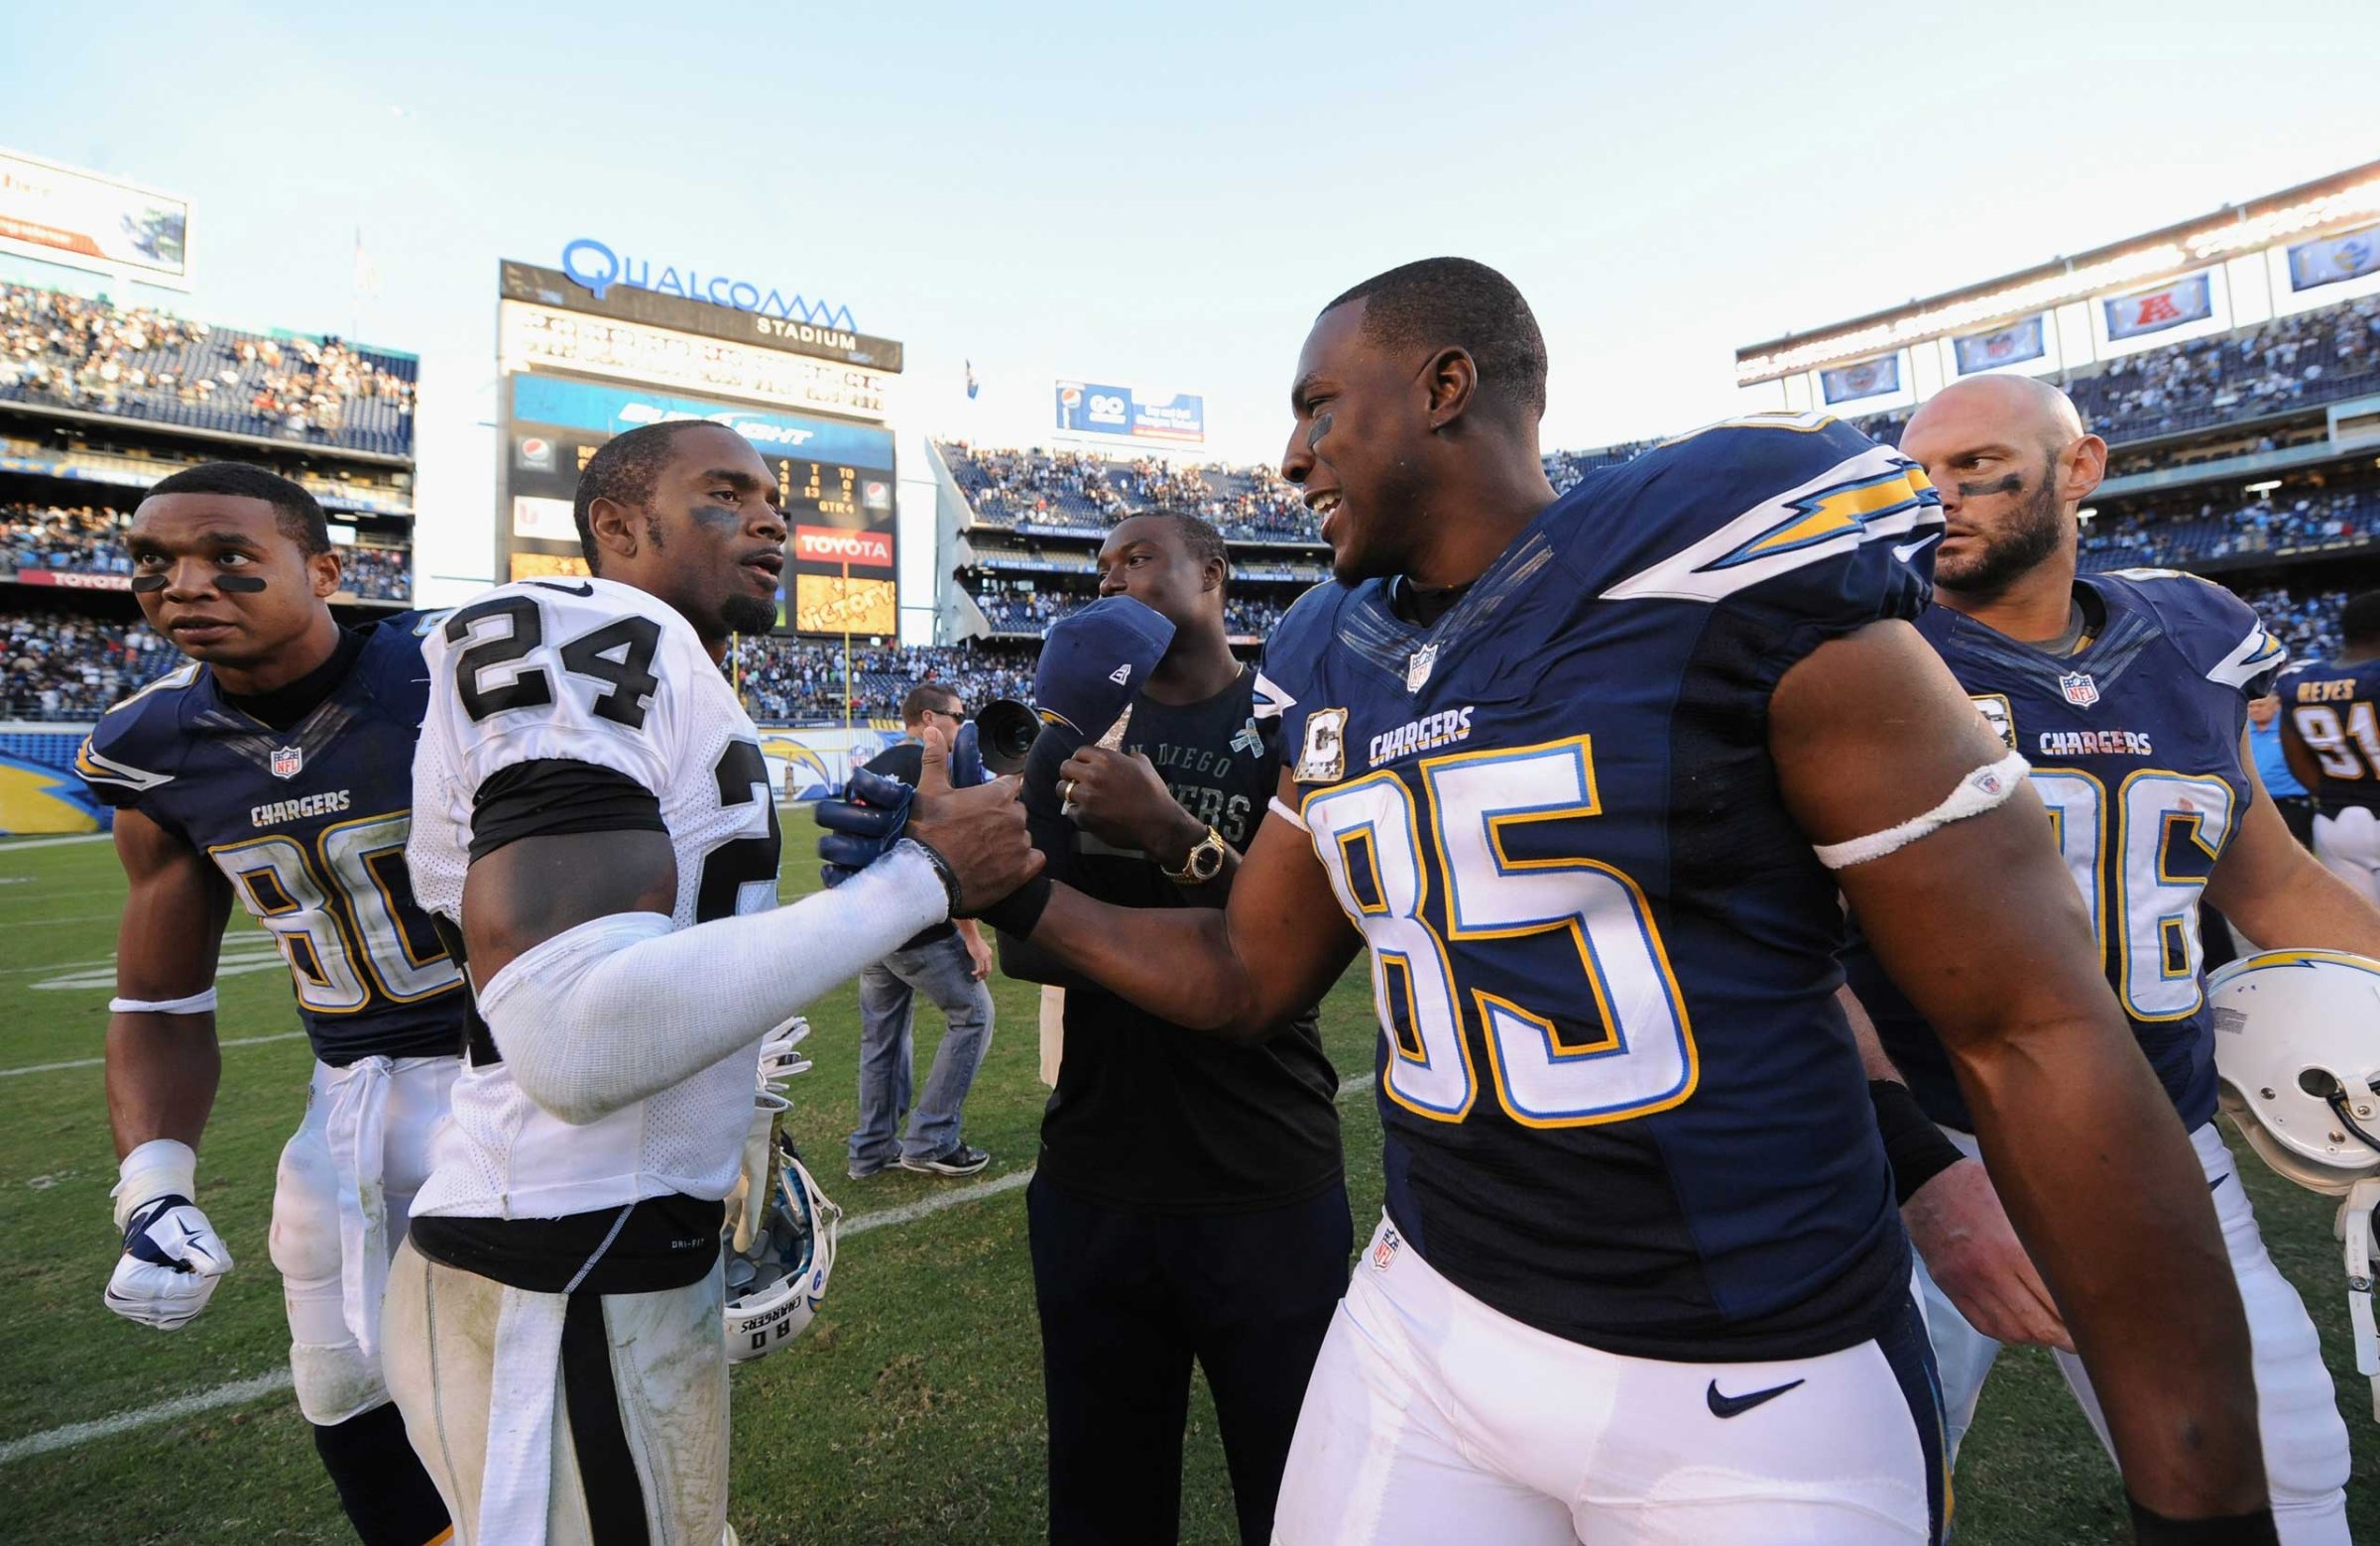 Charles Woodson #24 of the Oakland Raiders congratulated Antonio Gates #85 of the San Diego Chargers after the Chargers defeated the Oakland Raiders 13-6 in the game at Qualcomm Stadium on Nov. 16, 2014 in San Diego, Calif.